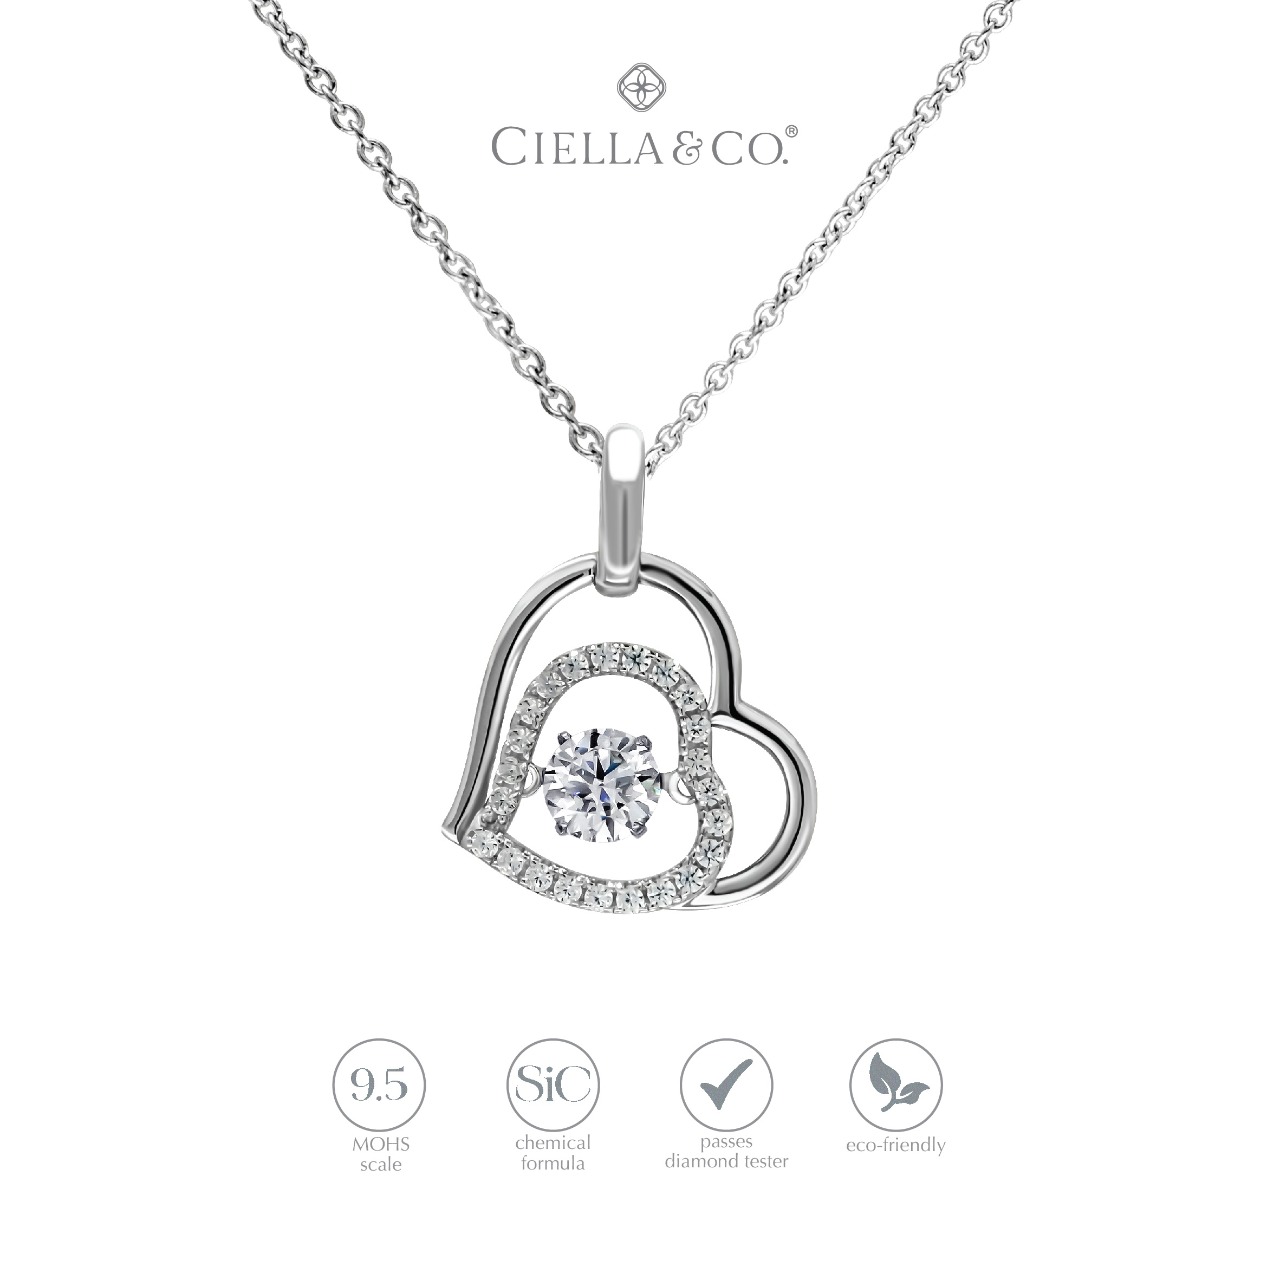 kalung-pendant-liontin-ciella-and-co-moissanite-amore-dancing-stone-necklace